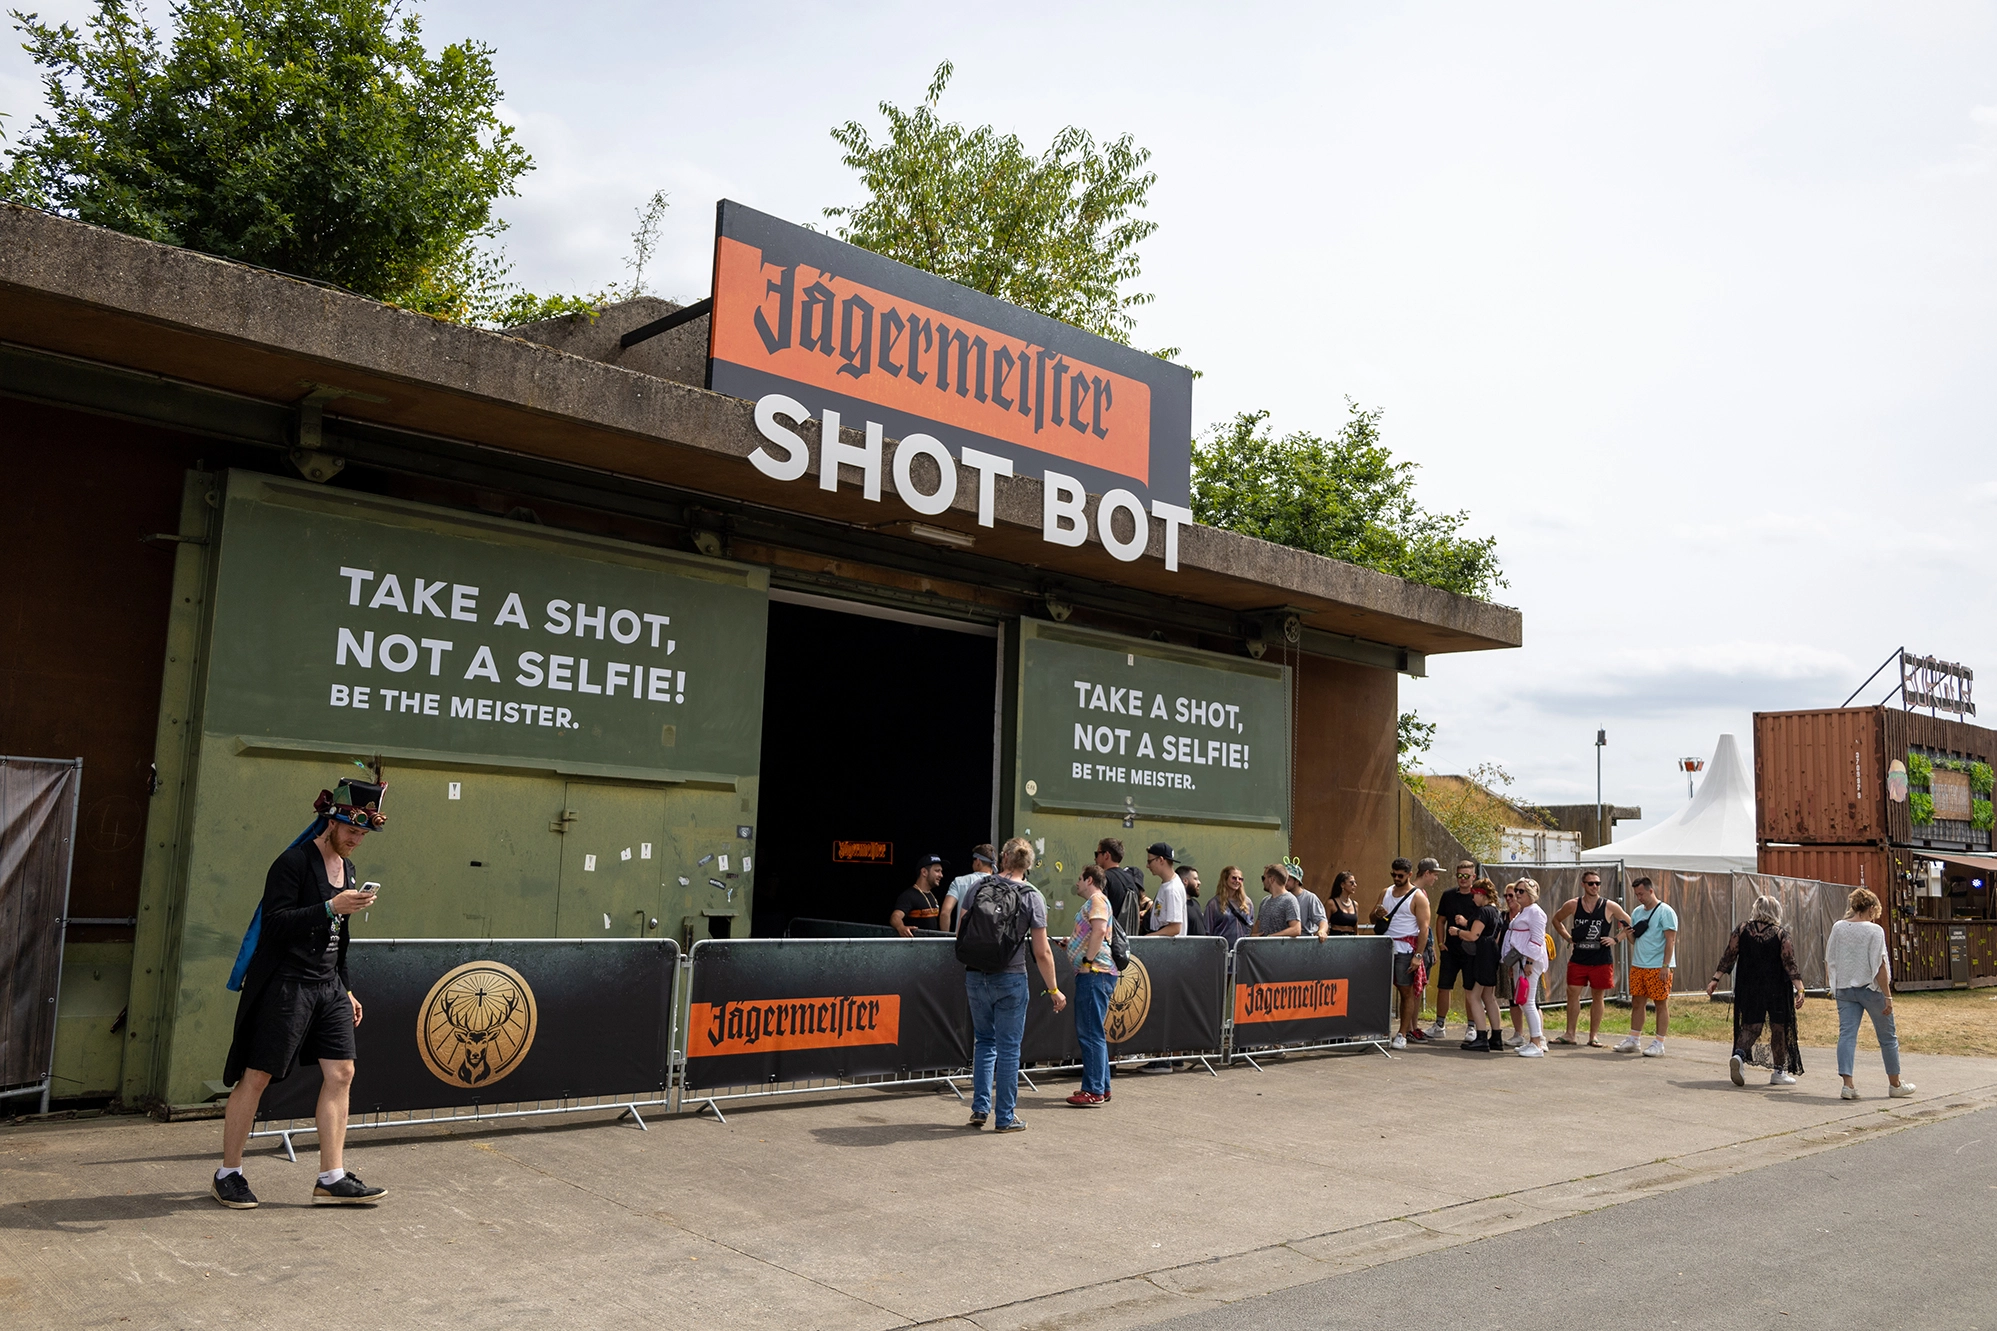 Attendees line up at a unique outdoor activation with the bold slogan 'TAKE A SHOT, NOT A SELFIE!' prominently displayed, featuring interactive engagement with a lively atmosphere.